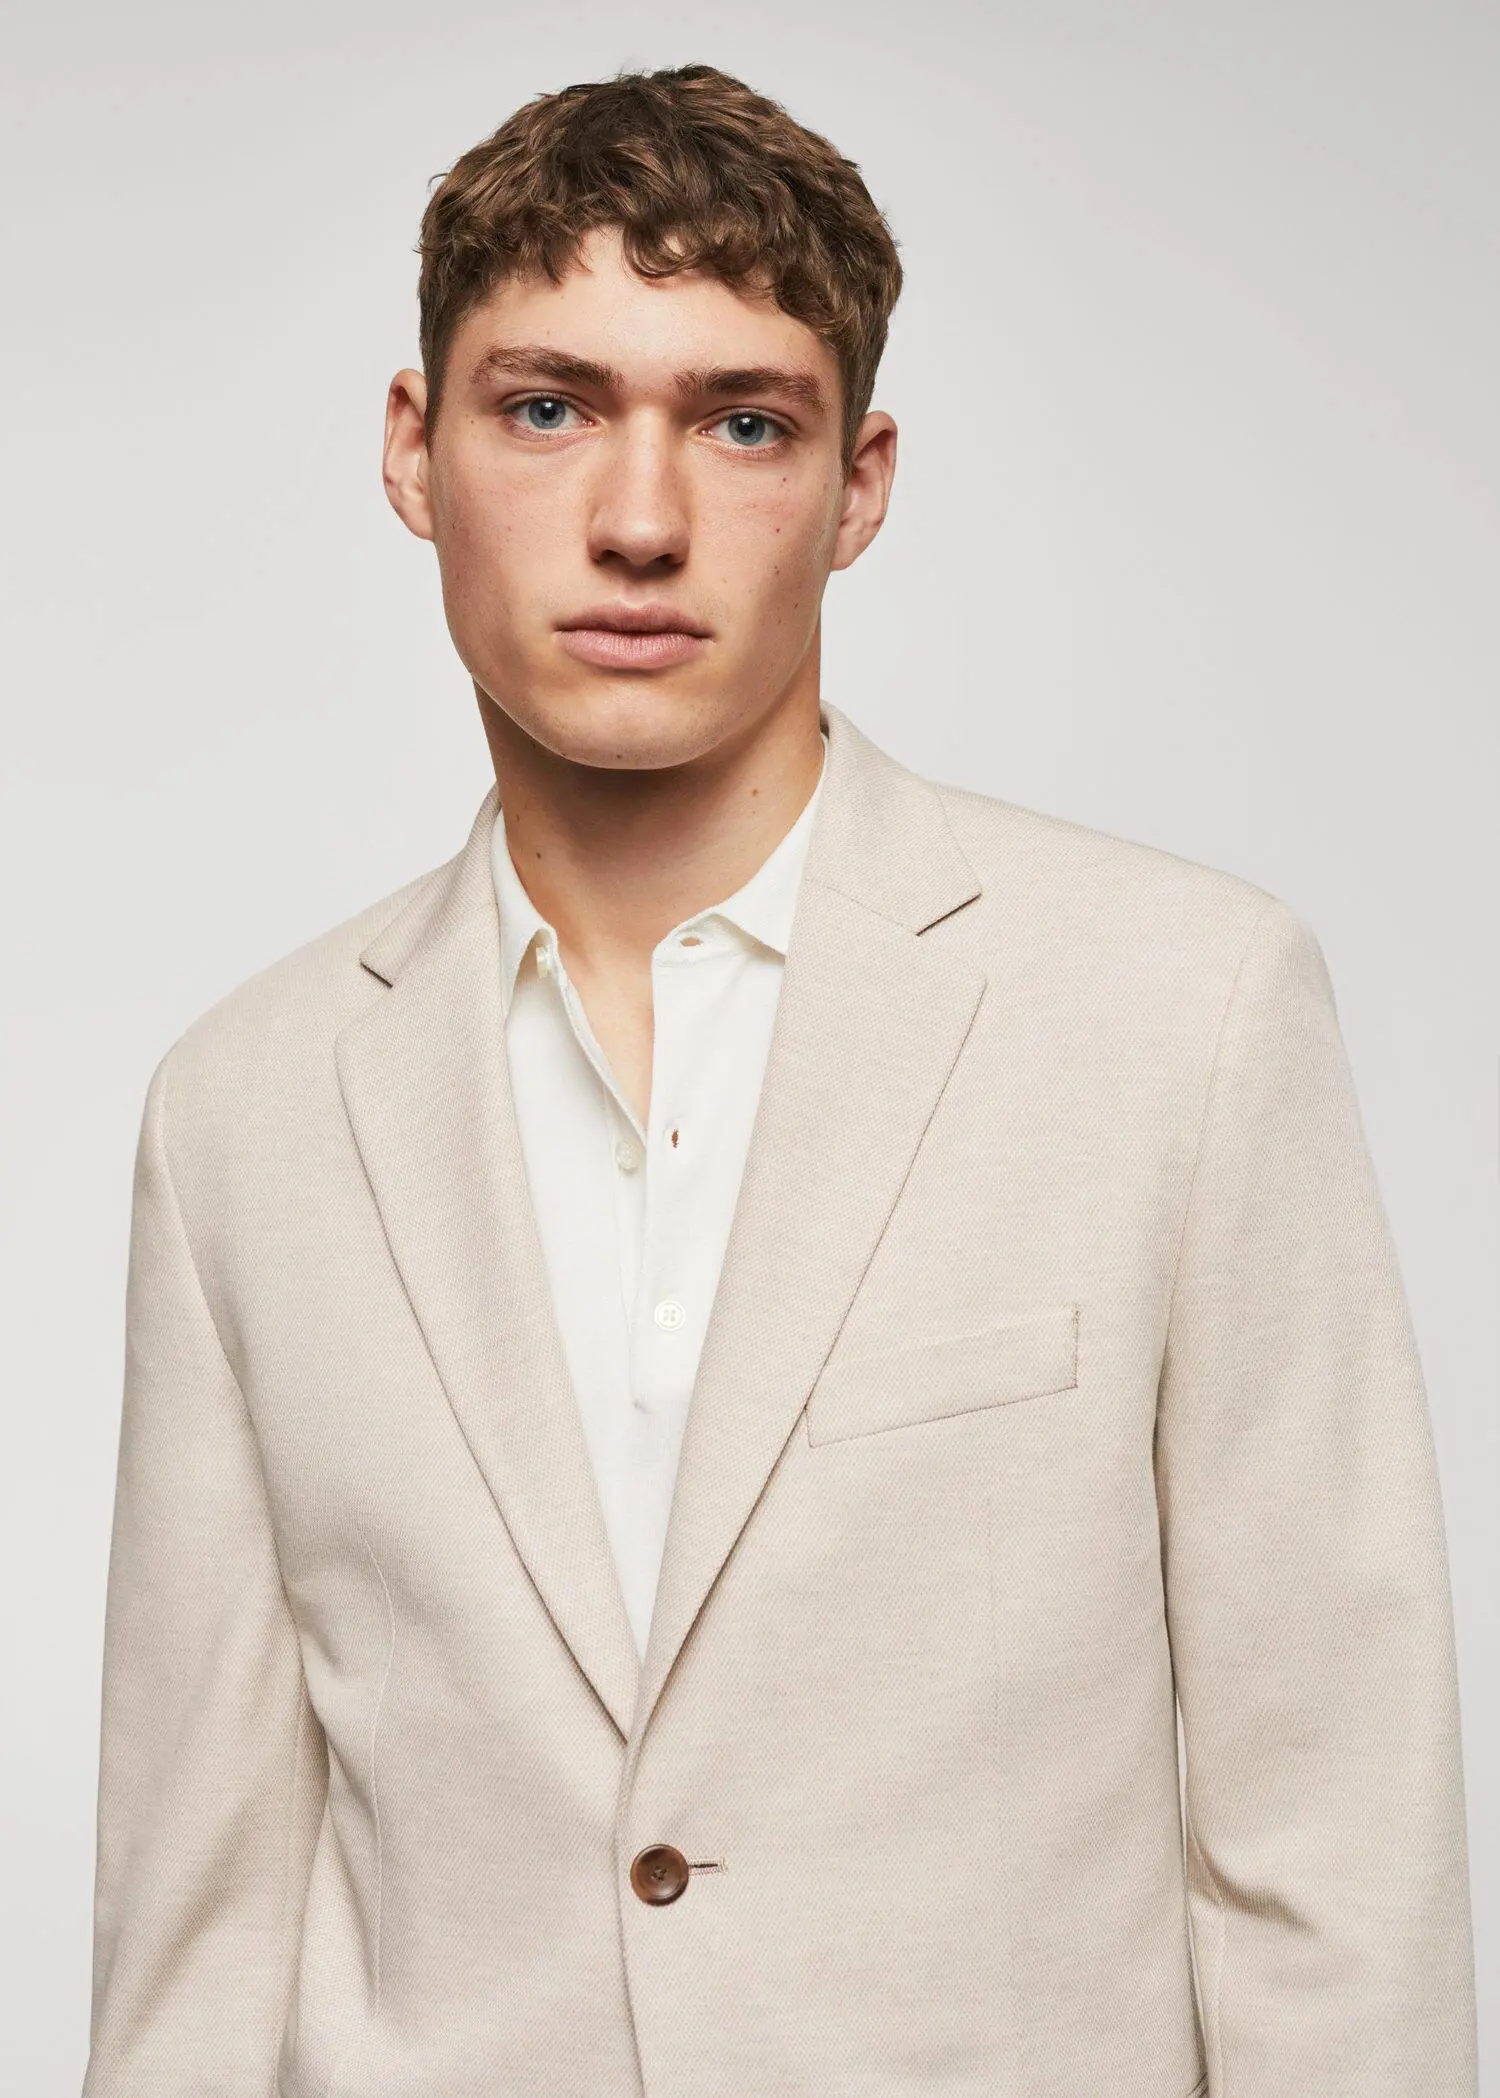 Mango Slim fit microstructure blazer. a man wearing a suit and white shirt. 